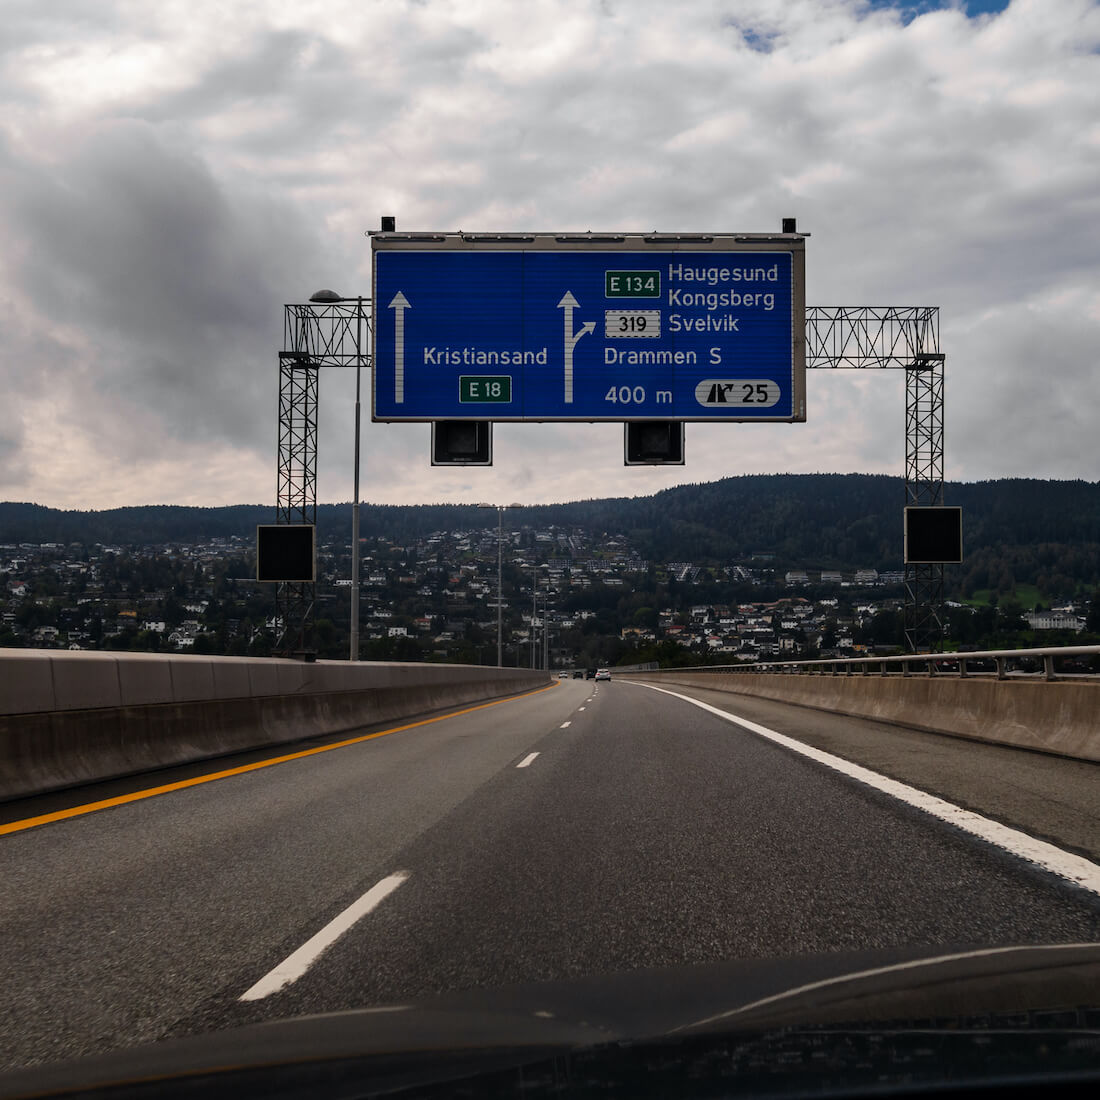 driving a car from Oslo to Kristiansand